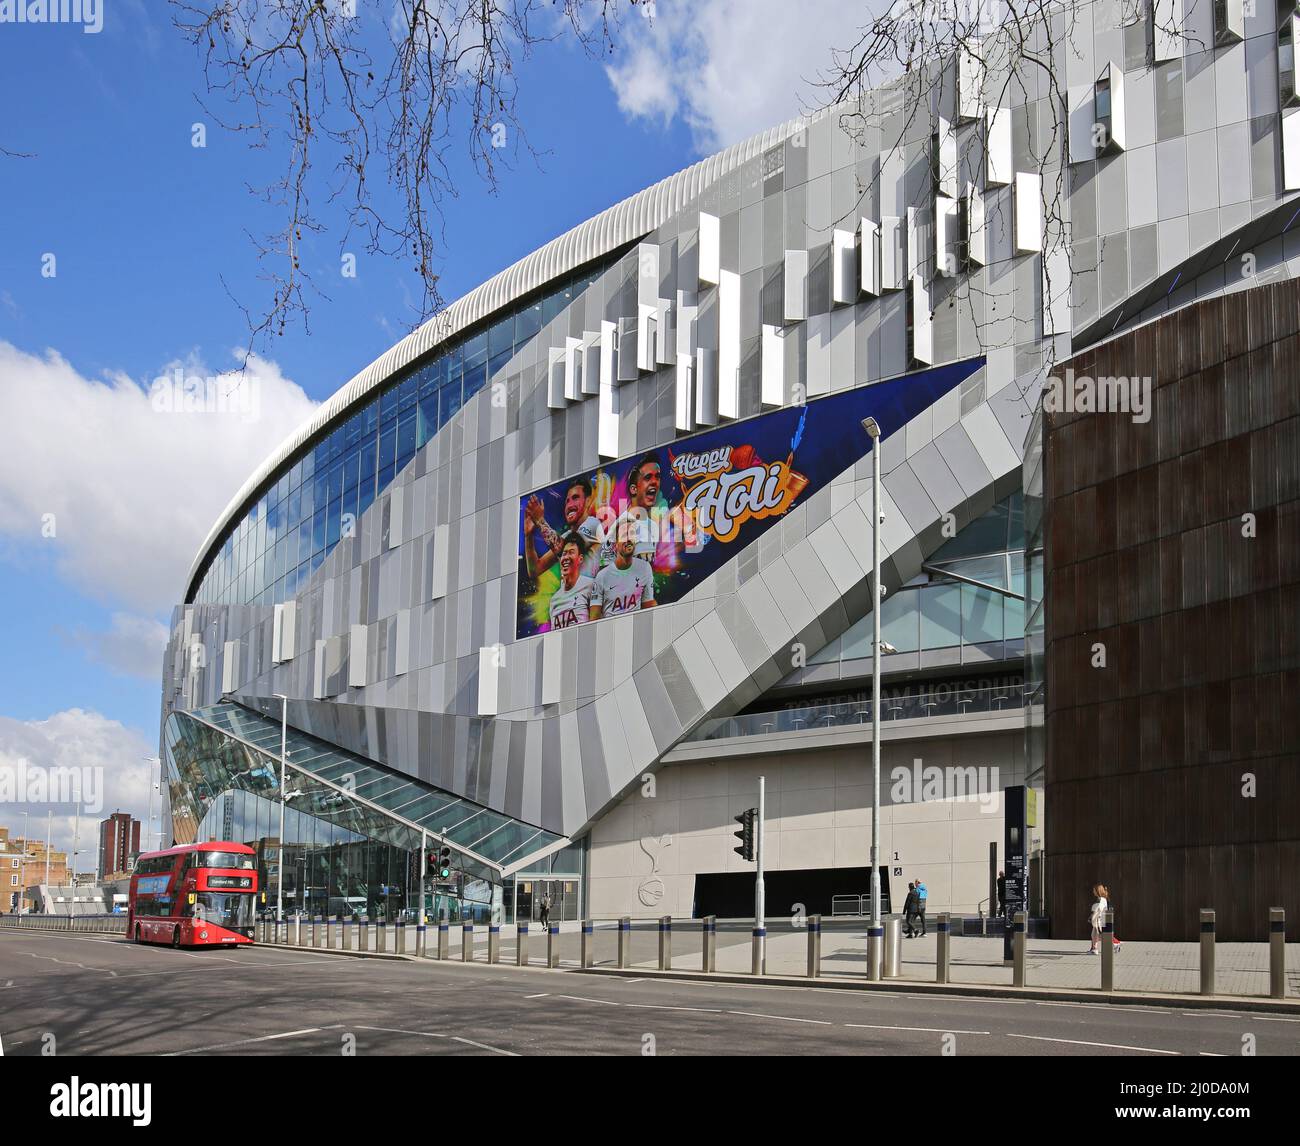 UK premier league football club Tottenham Hotspur's new stadium at White Hart Lane, London. Designed by architects Populous, opened in 2019 Stock Photo